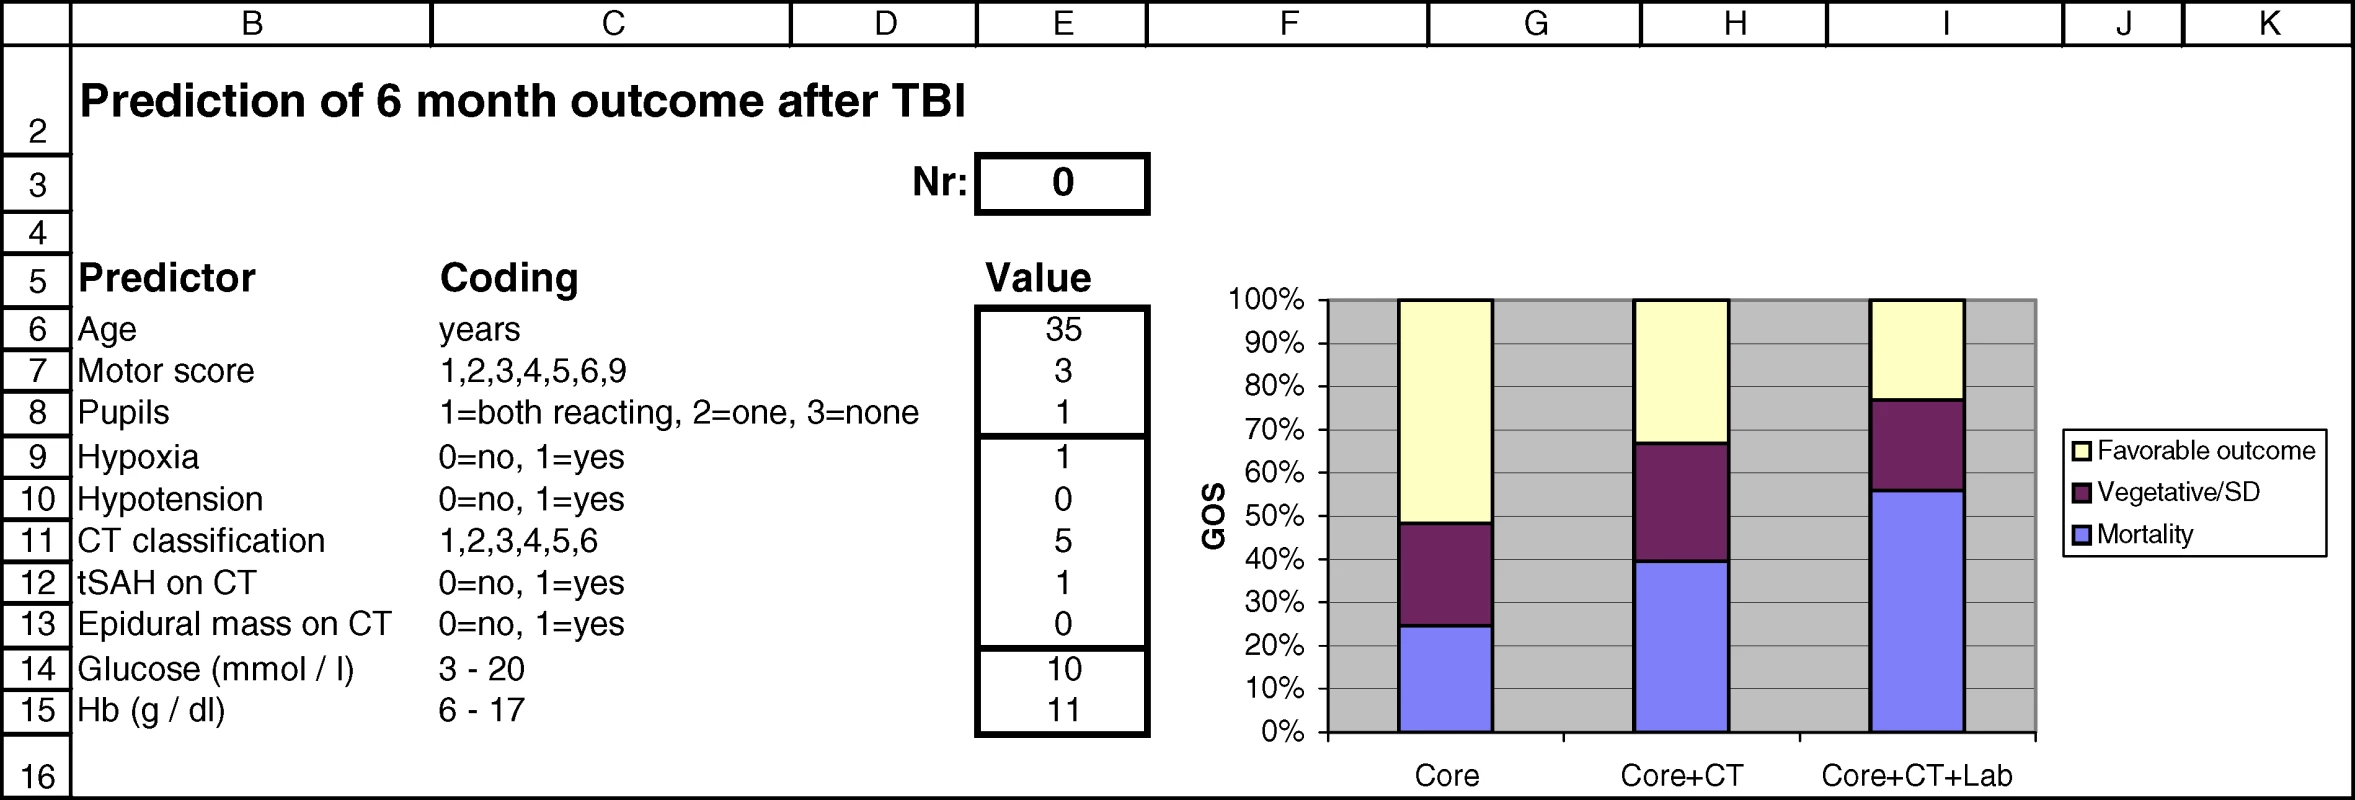 Screenshot of the Spreadsheet with Calculations of Probabilities for the Three Prediction Models